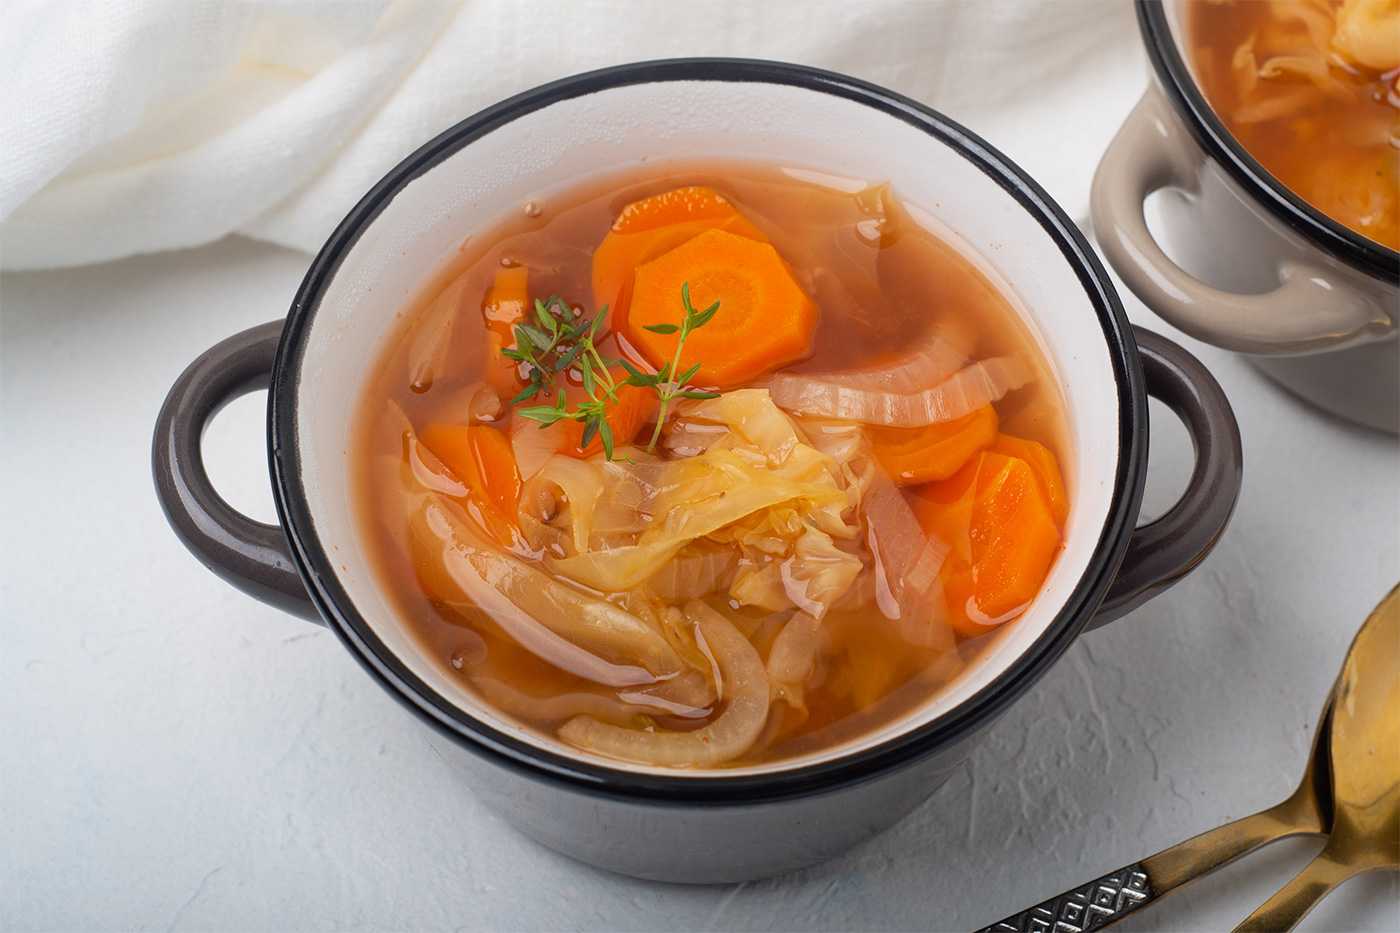 Clear soup fill with white cabbage, carrot slices, onion and spices